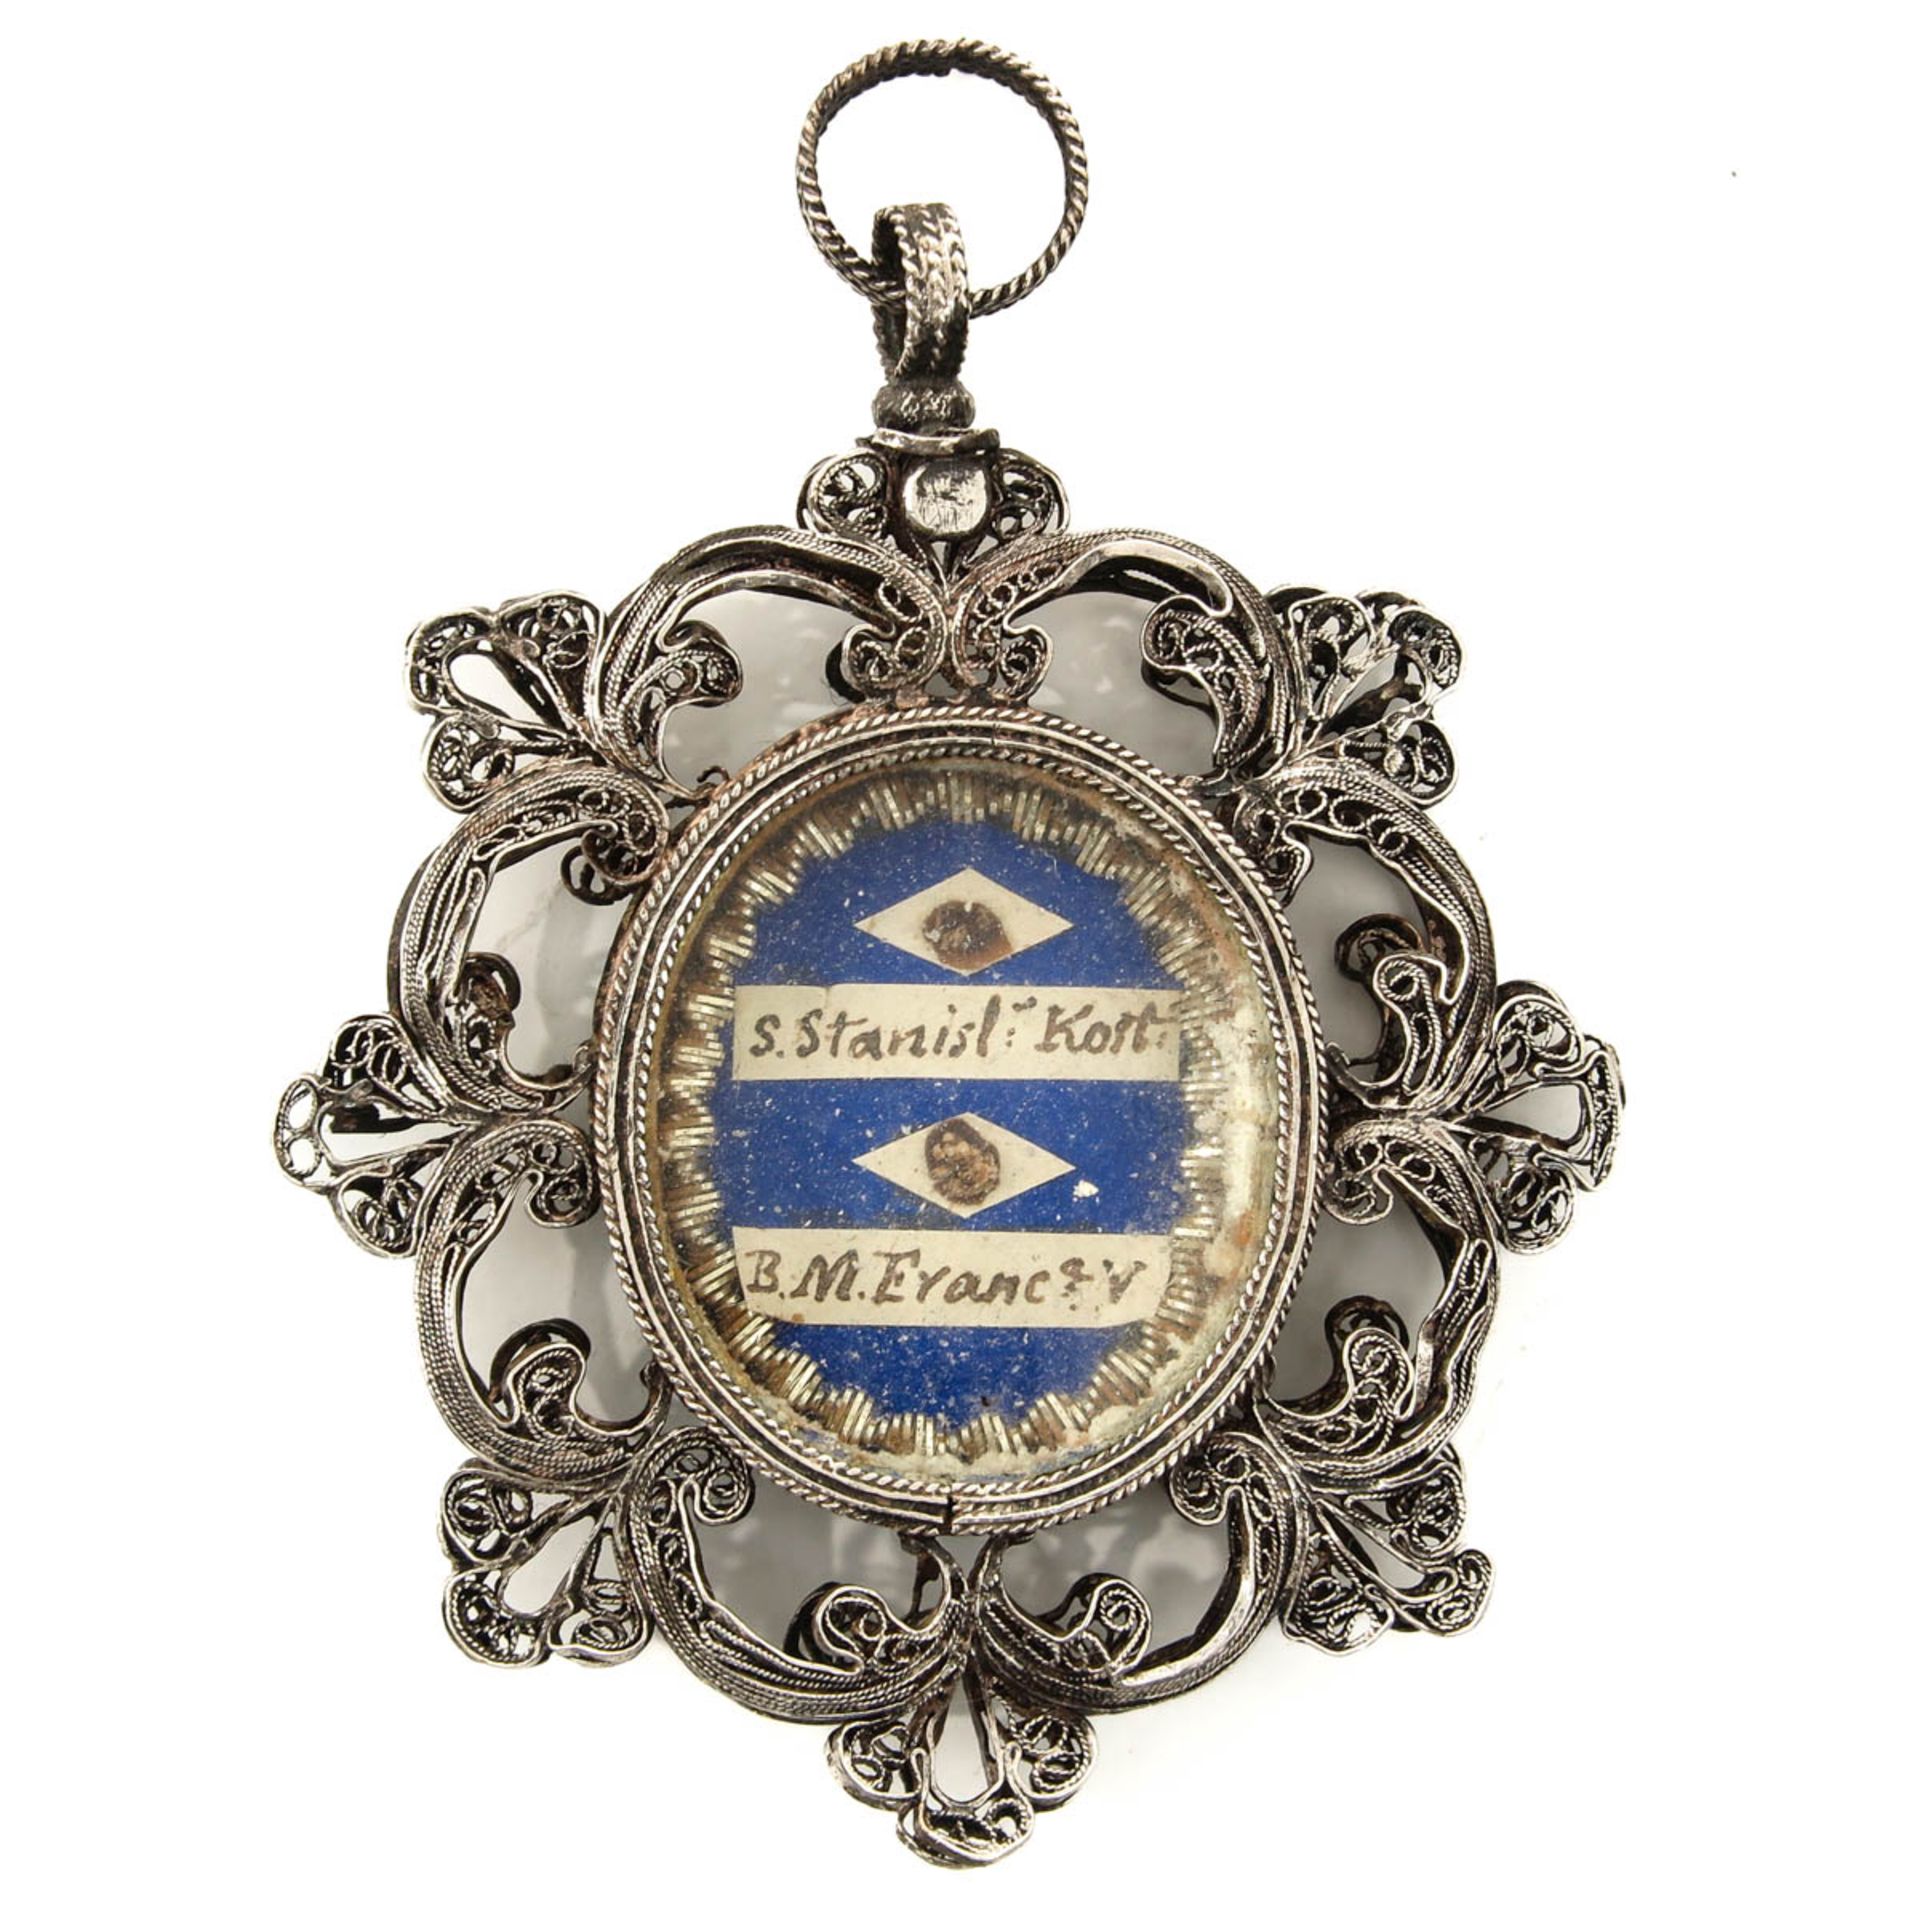 A 19th Century Silver Relic Holder